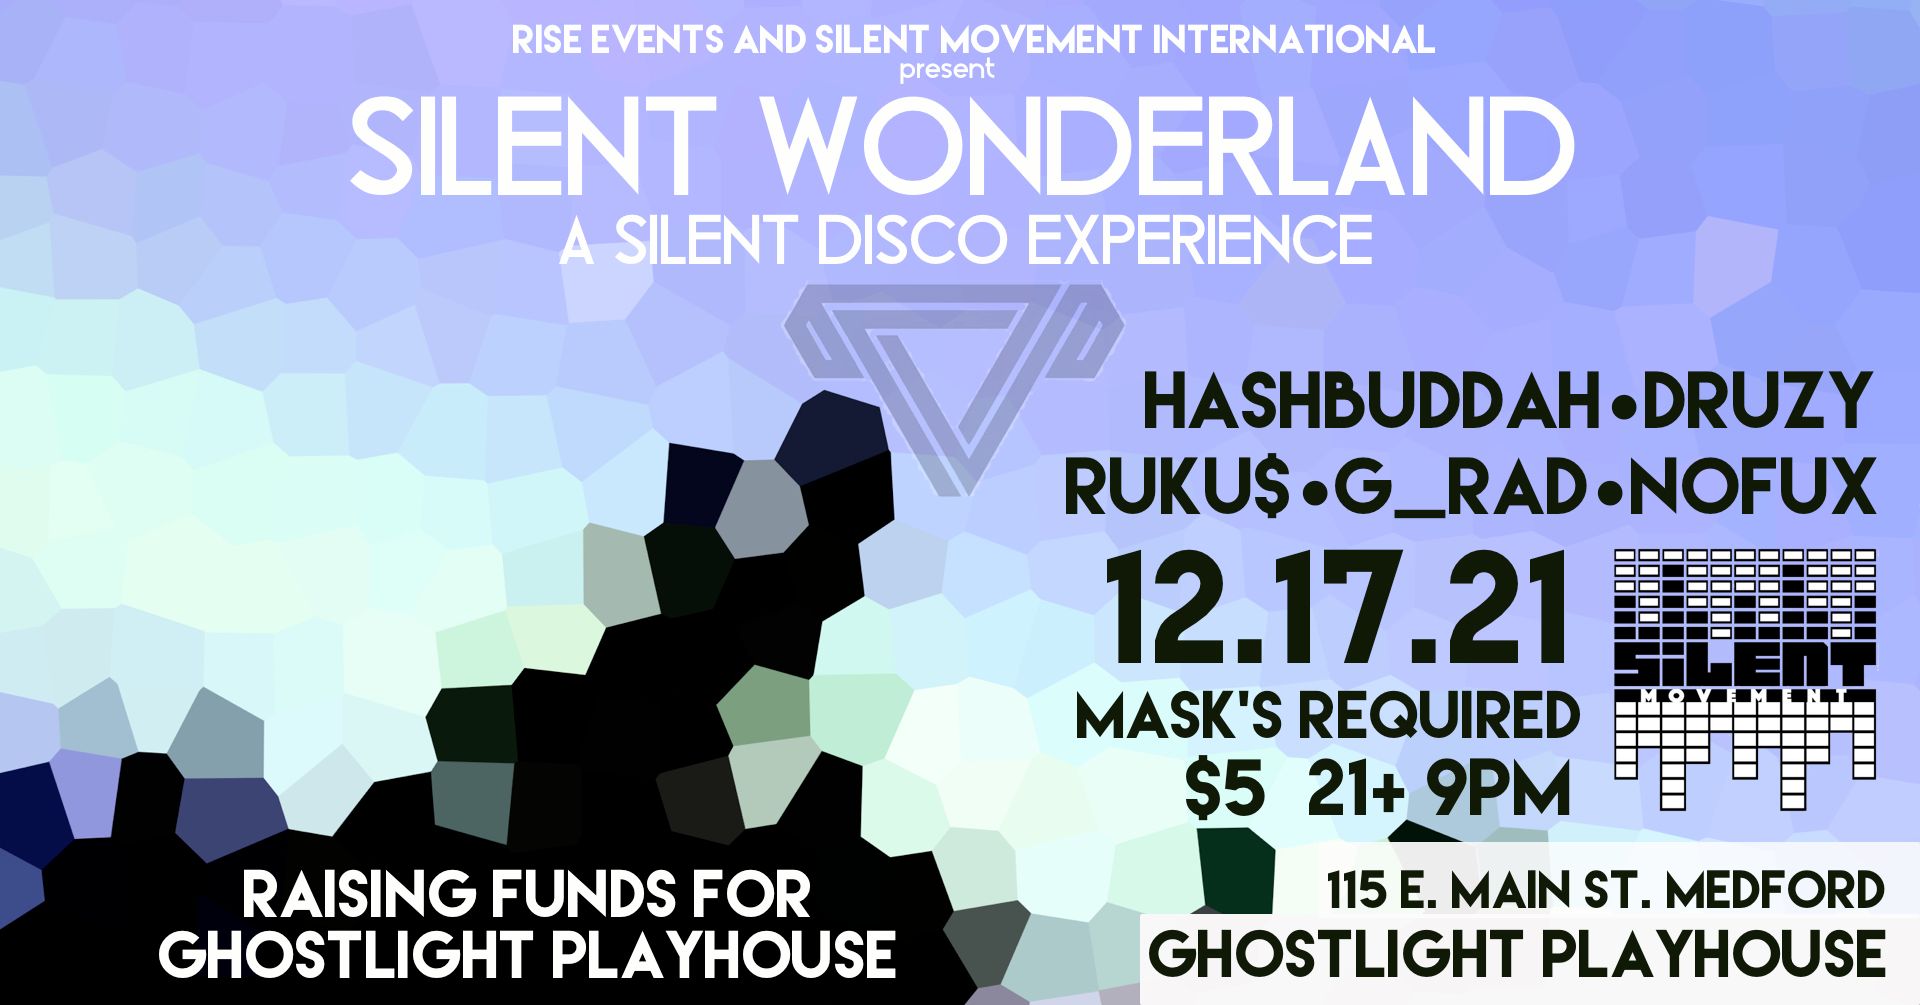 Silent Movement Presents Silent Wonderland, a silent disco experience at the Ghostlight Playhouse on December 17. 5 Dollars at the door, masks required, starts at 9pm, 21+ only..